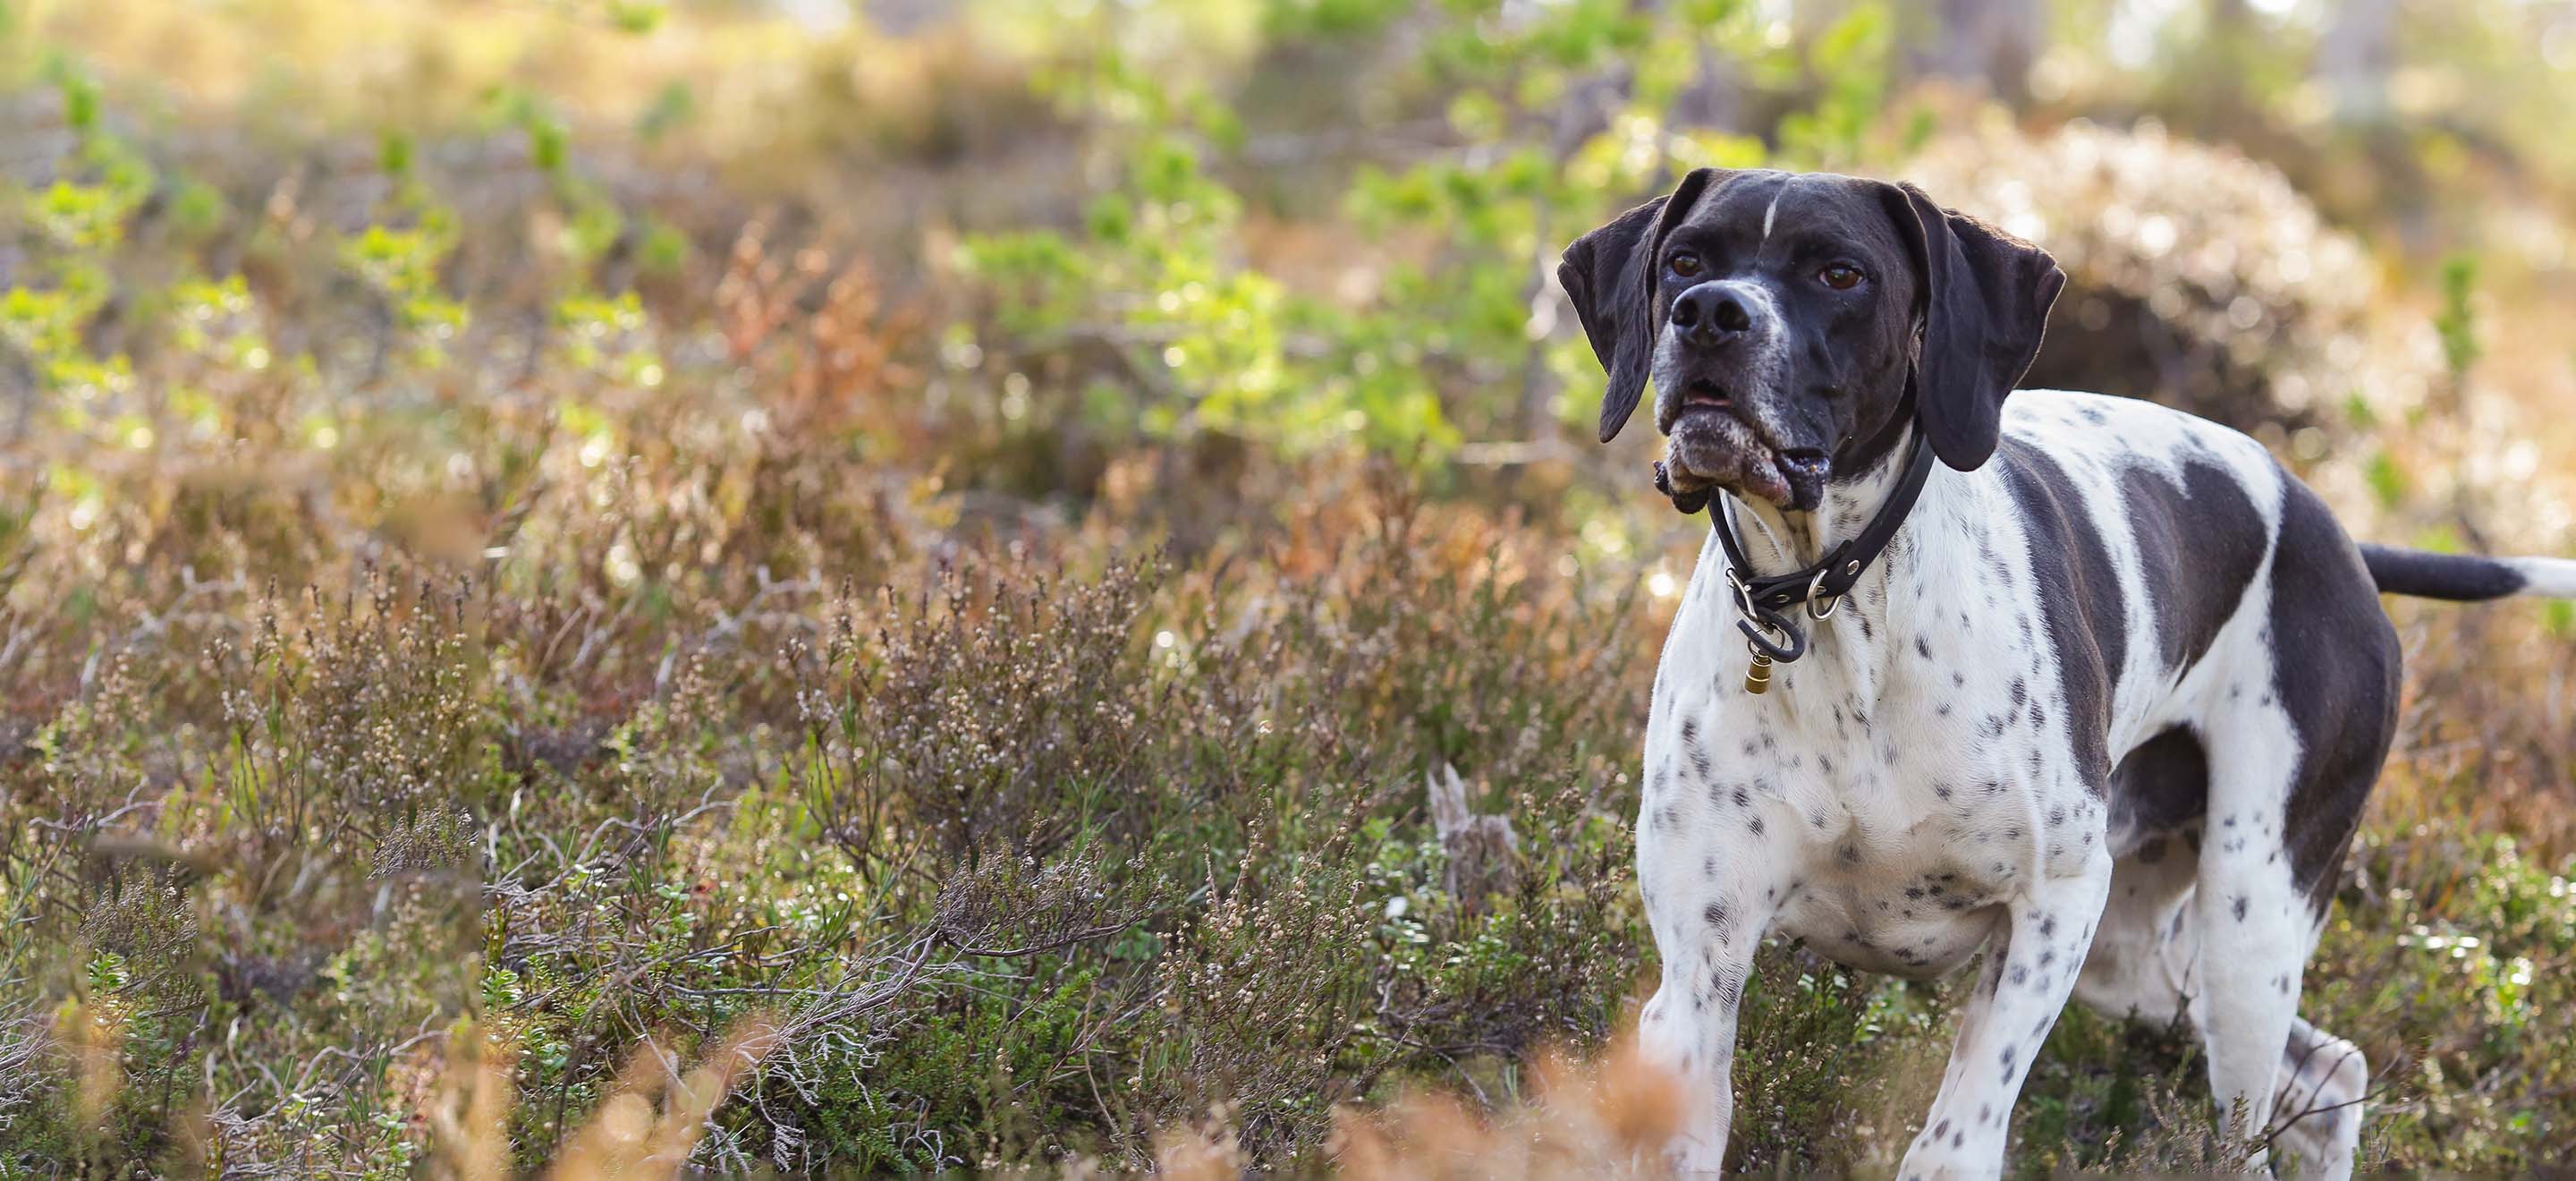 Pointer dog standing in the brush in nature image